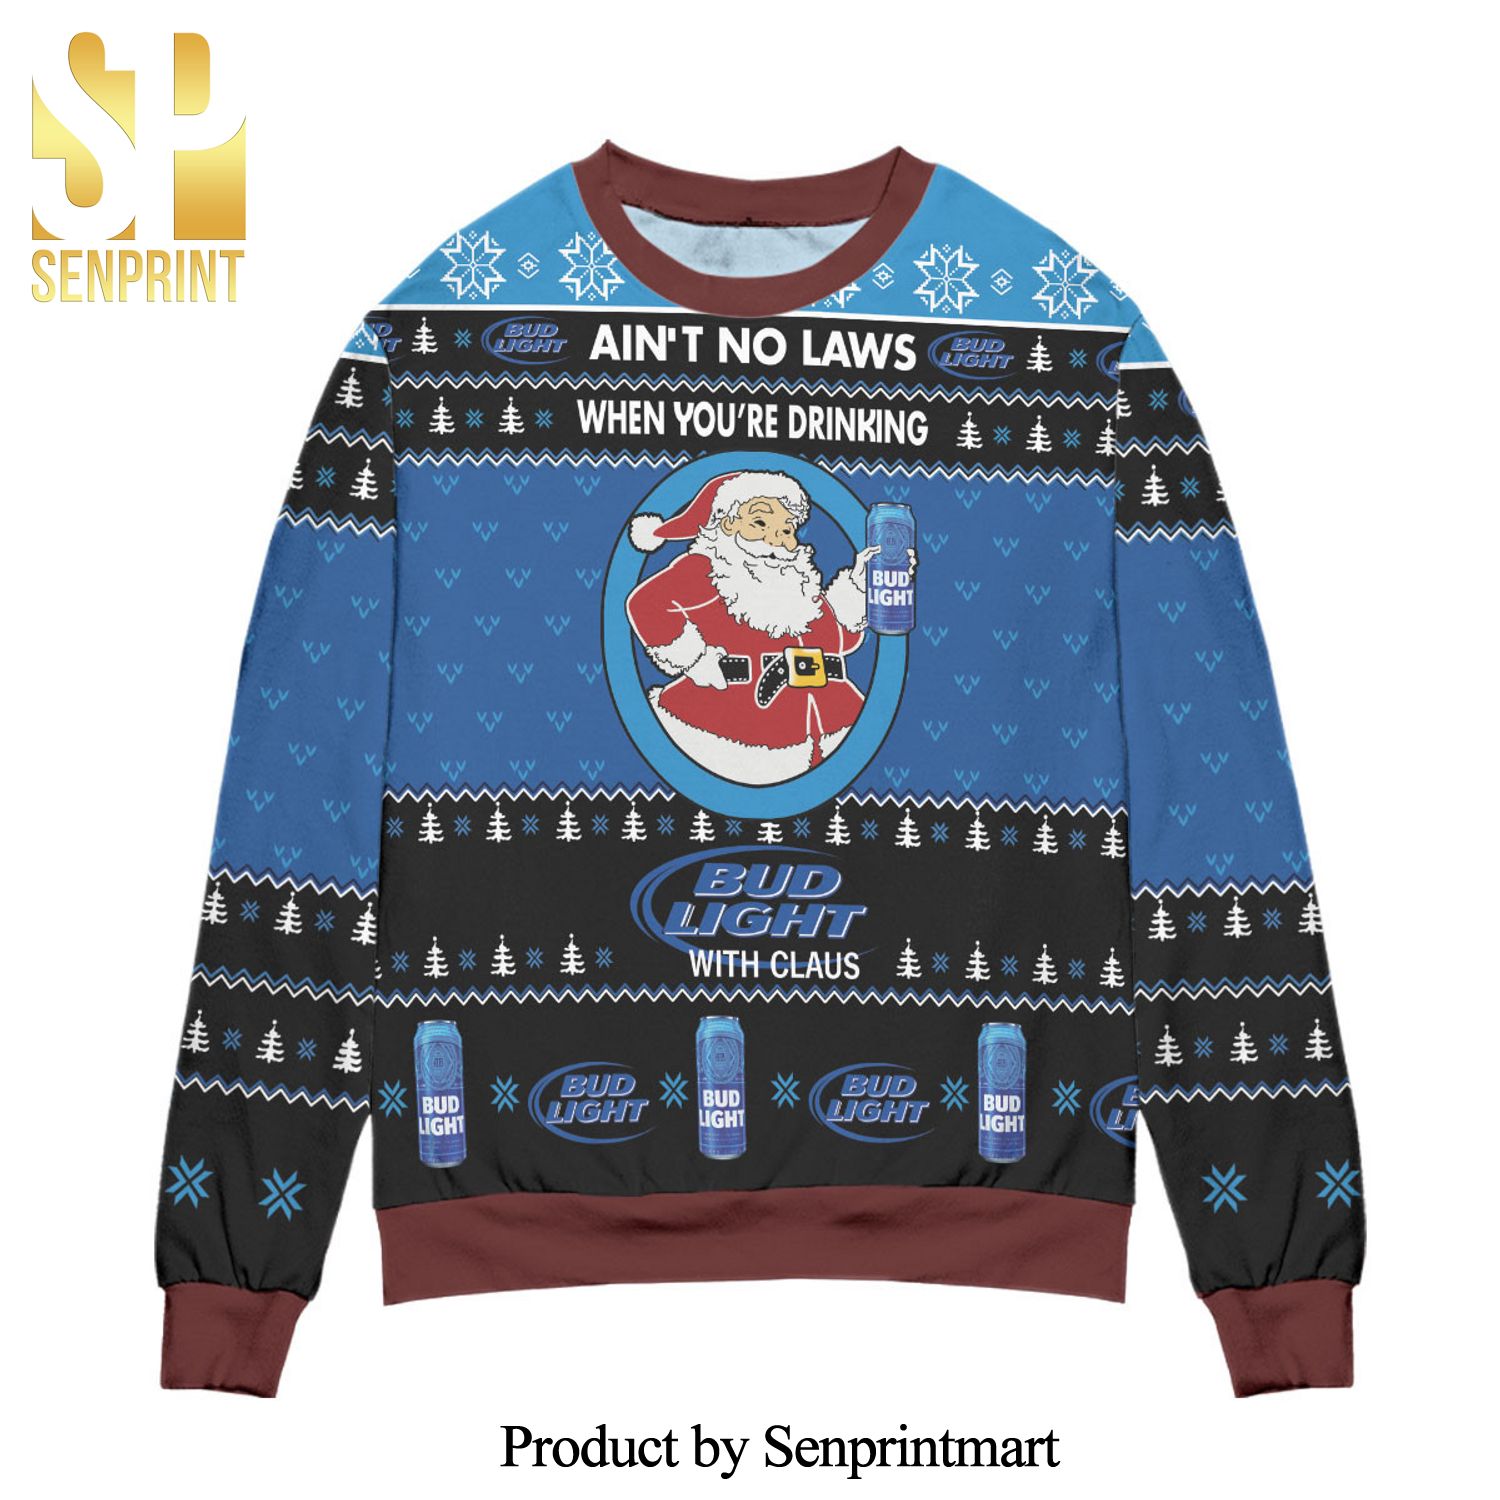 Ain’t No Laws When You’re Drinking Bud Light With Claus Pine Tree Pattern Knitted Ugly Christmas Sweater – Blue